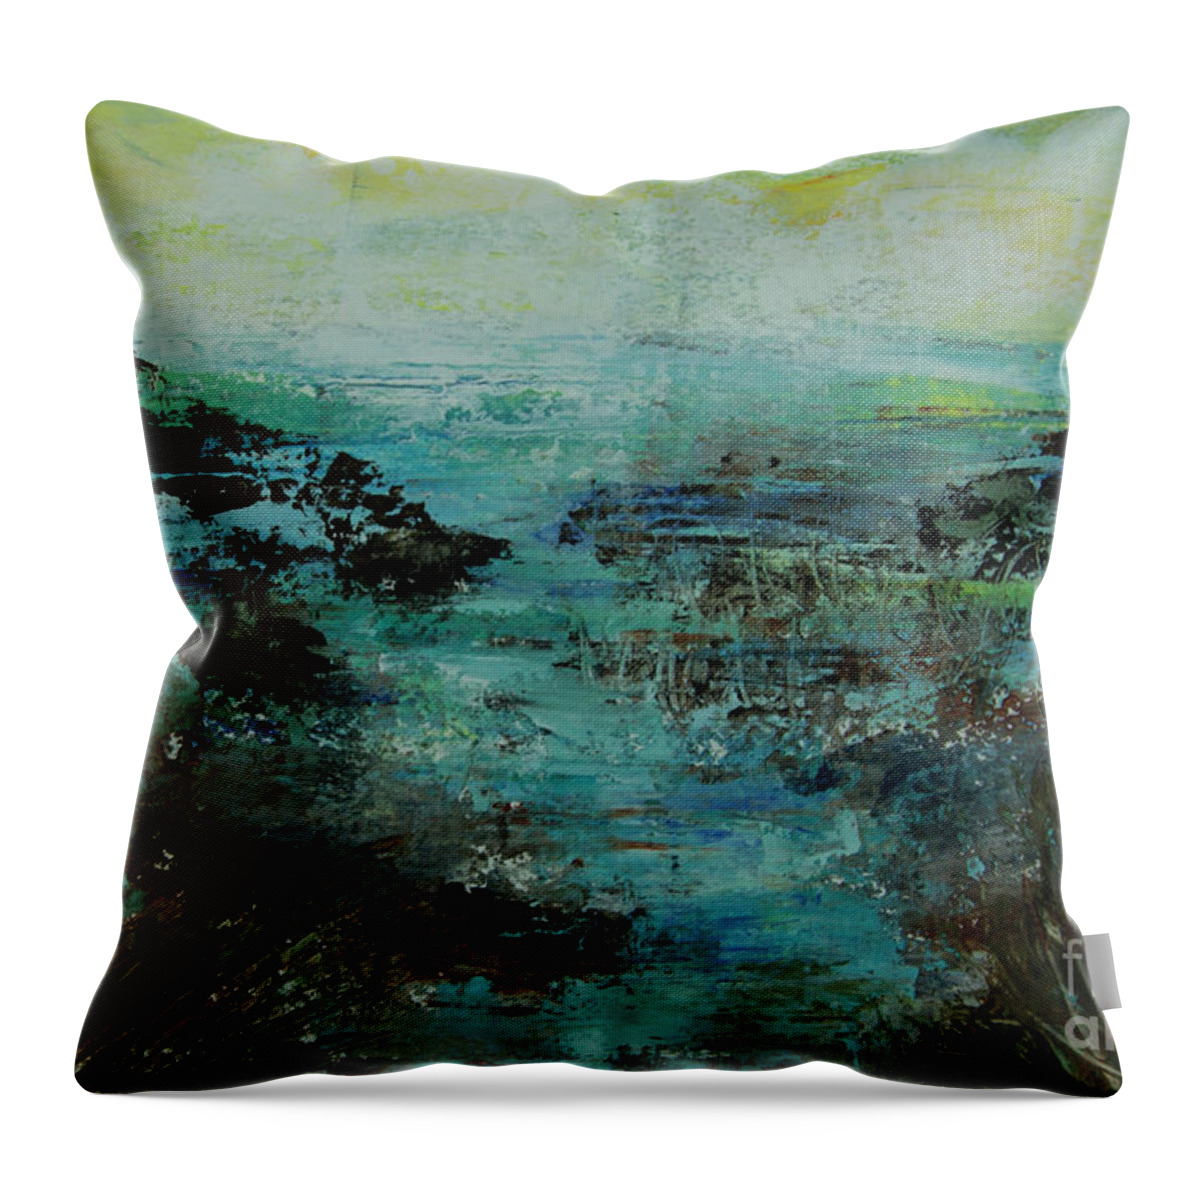  Throw Pillow featuring the painting Tidal Area by Jeanette French